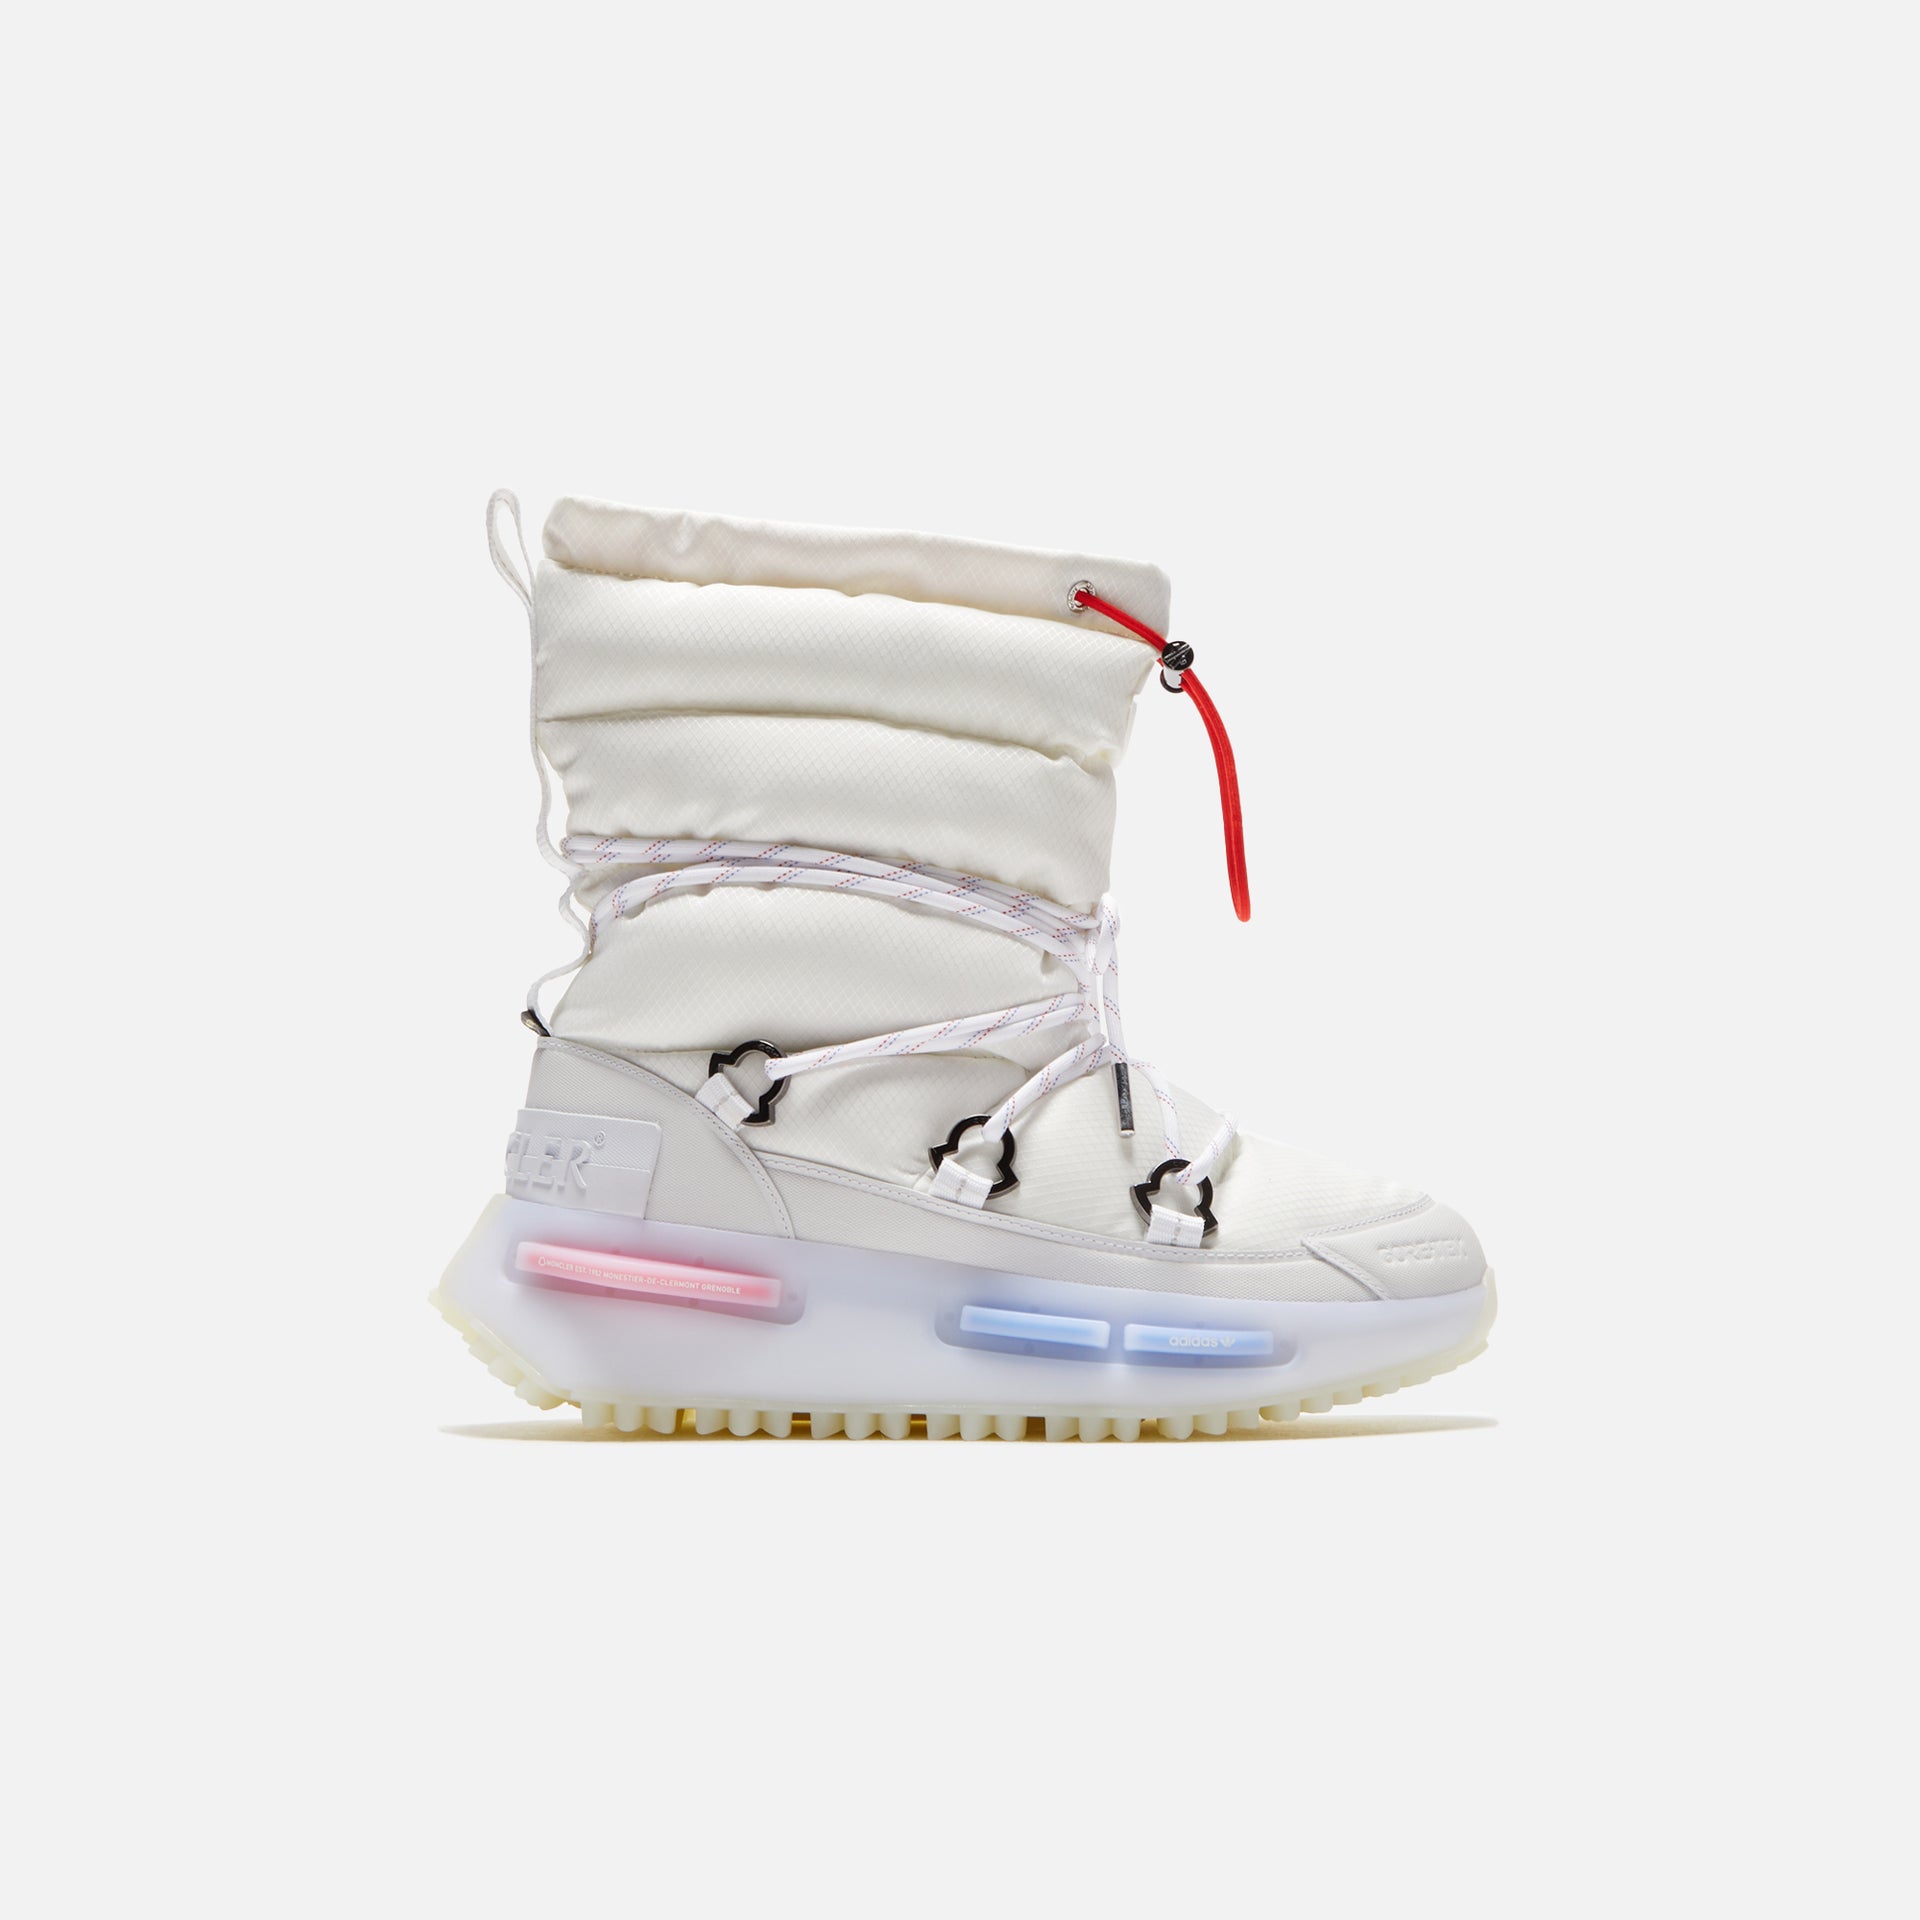 Moncler x reissue adidas Originals NMD Mid Ankle Boots - White